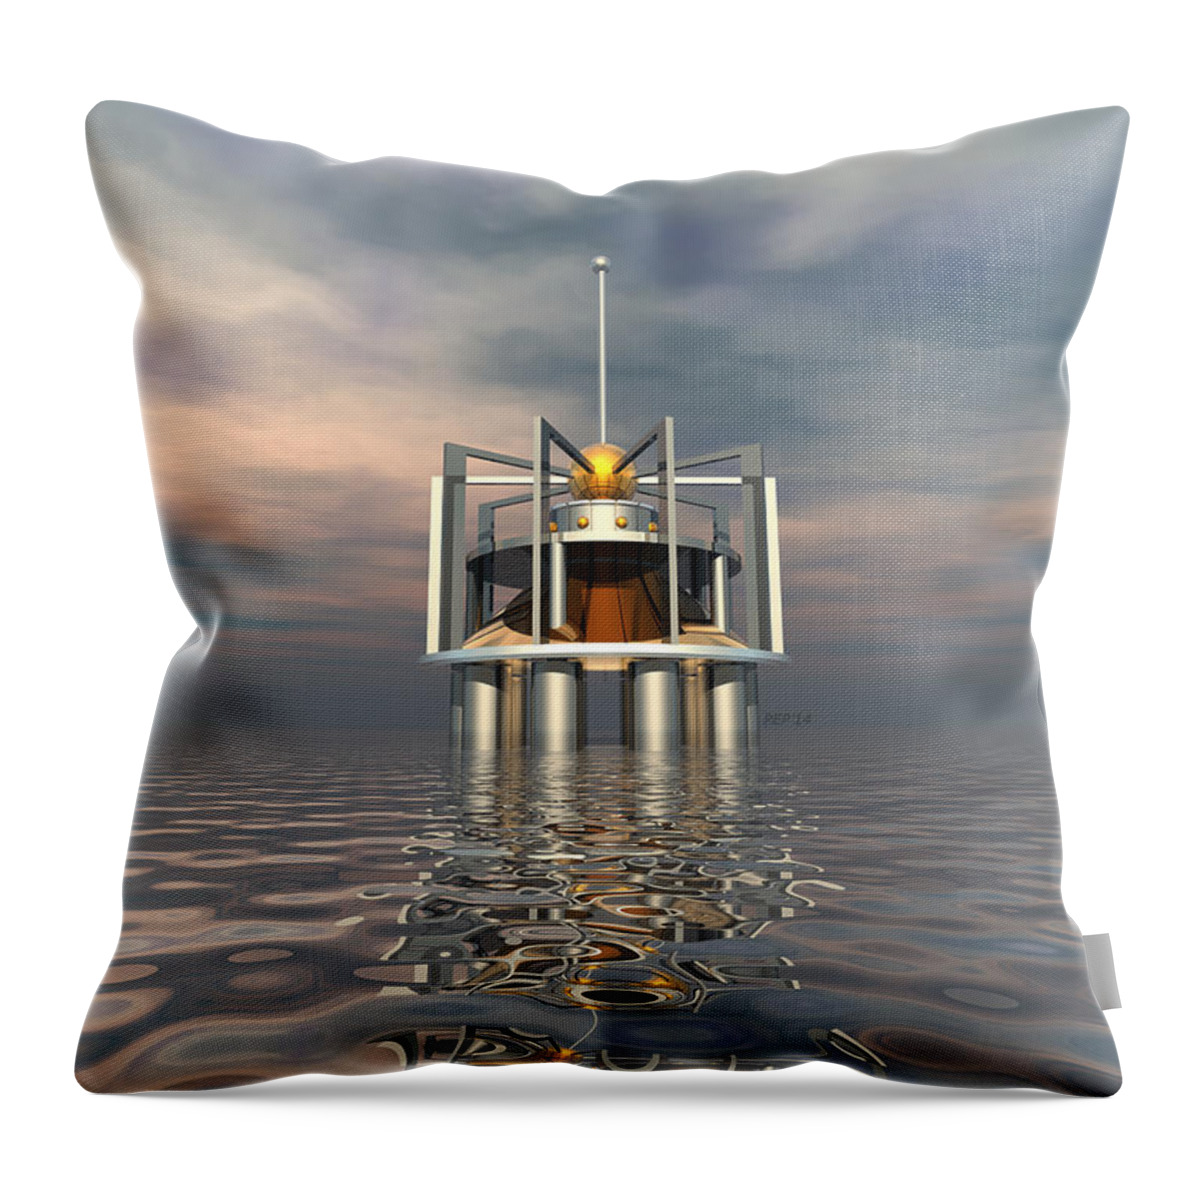 Structure Throw Pillow featuring the digital art Outpost by Phil Perkins